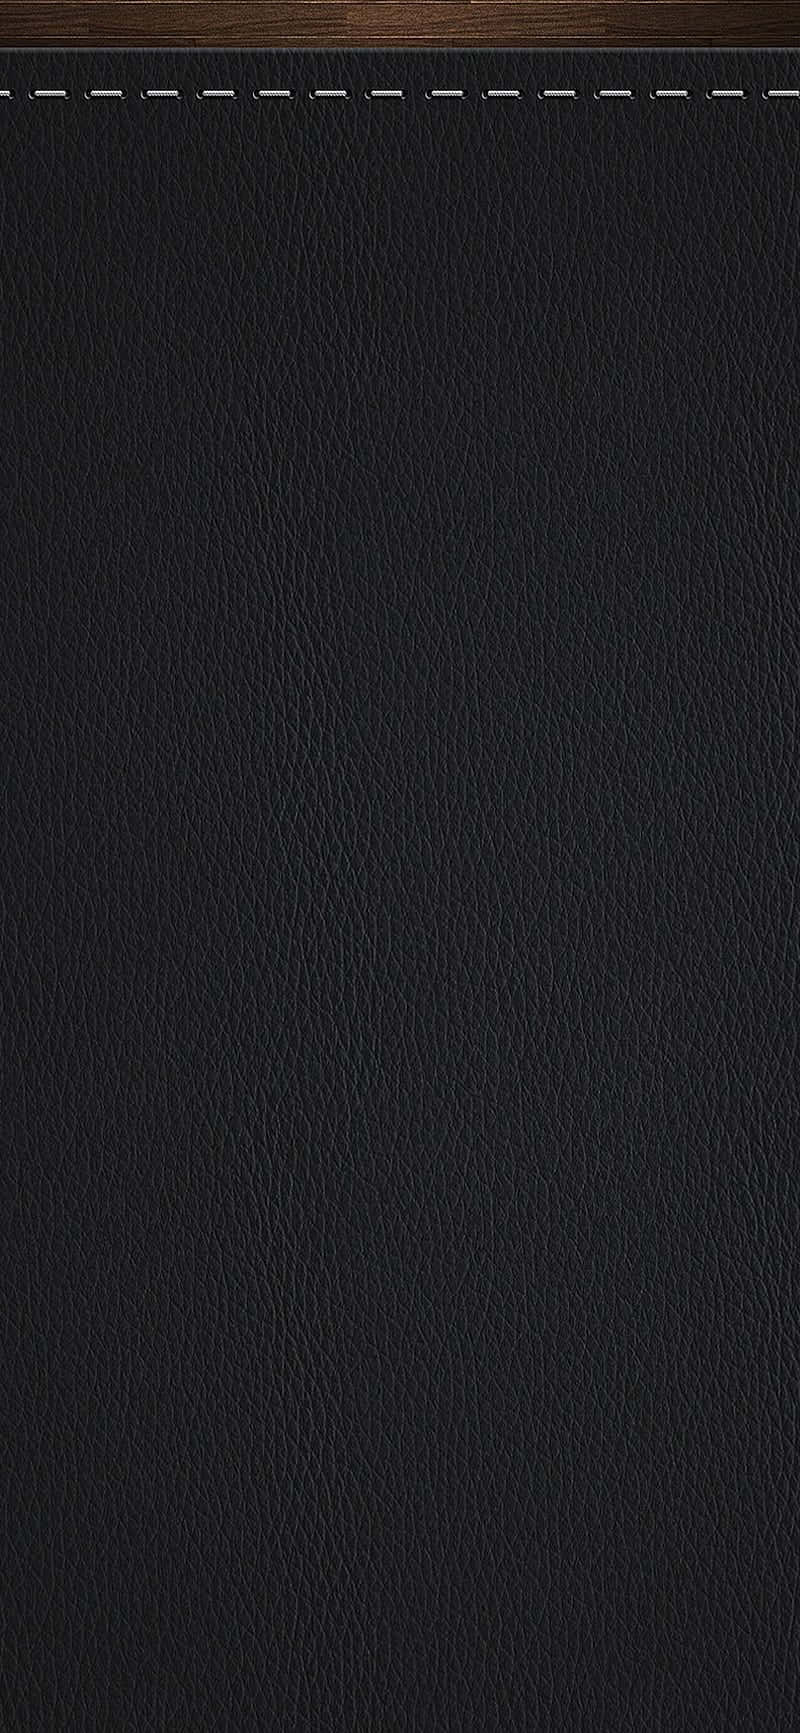 Glossy black leather fabric that shines as it catches the light Wallpaper